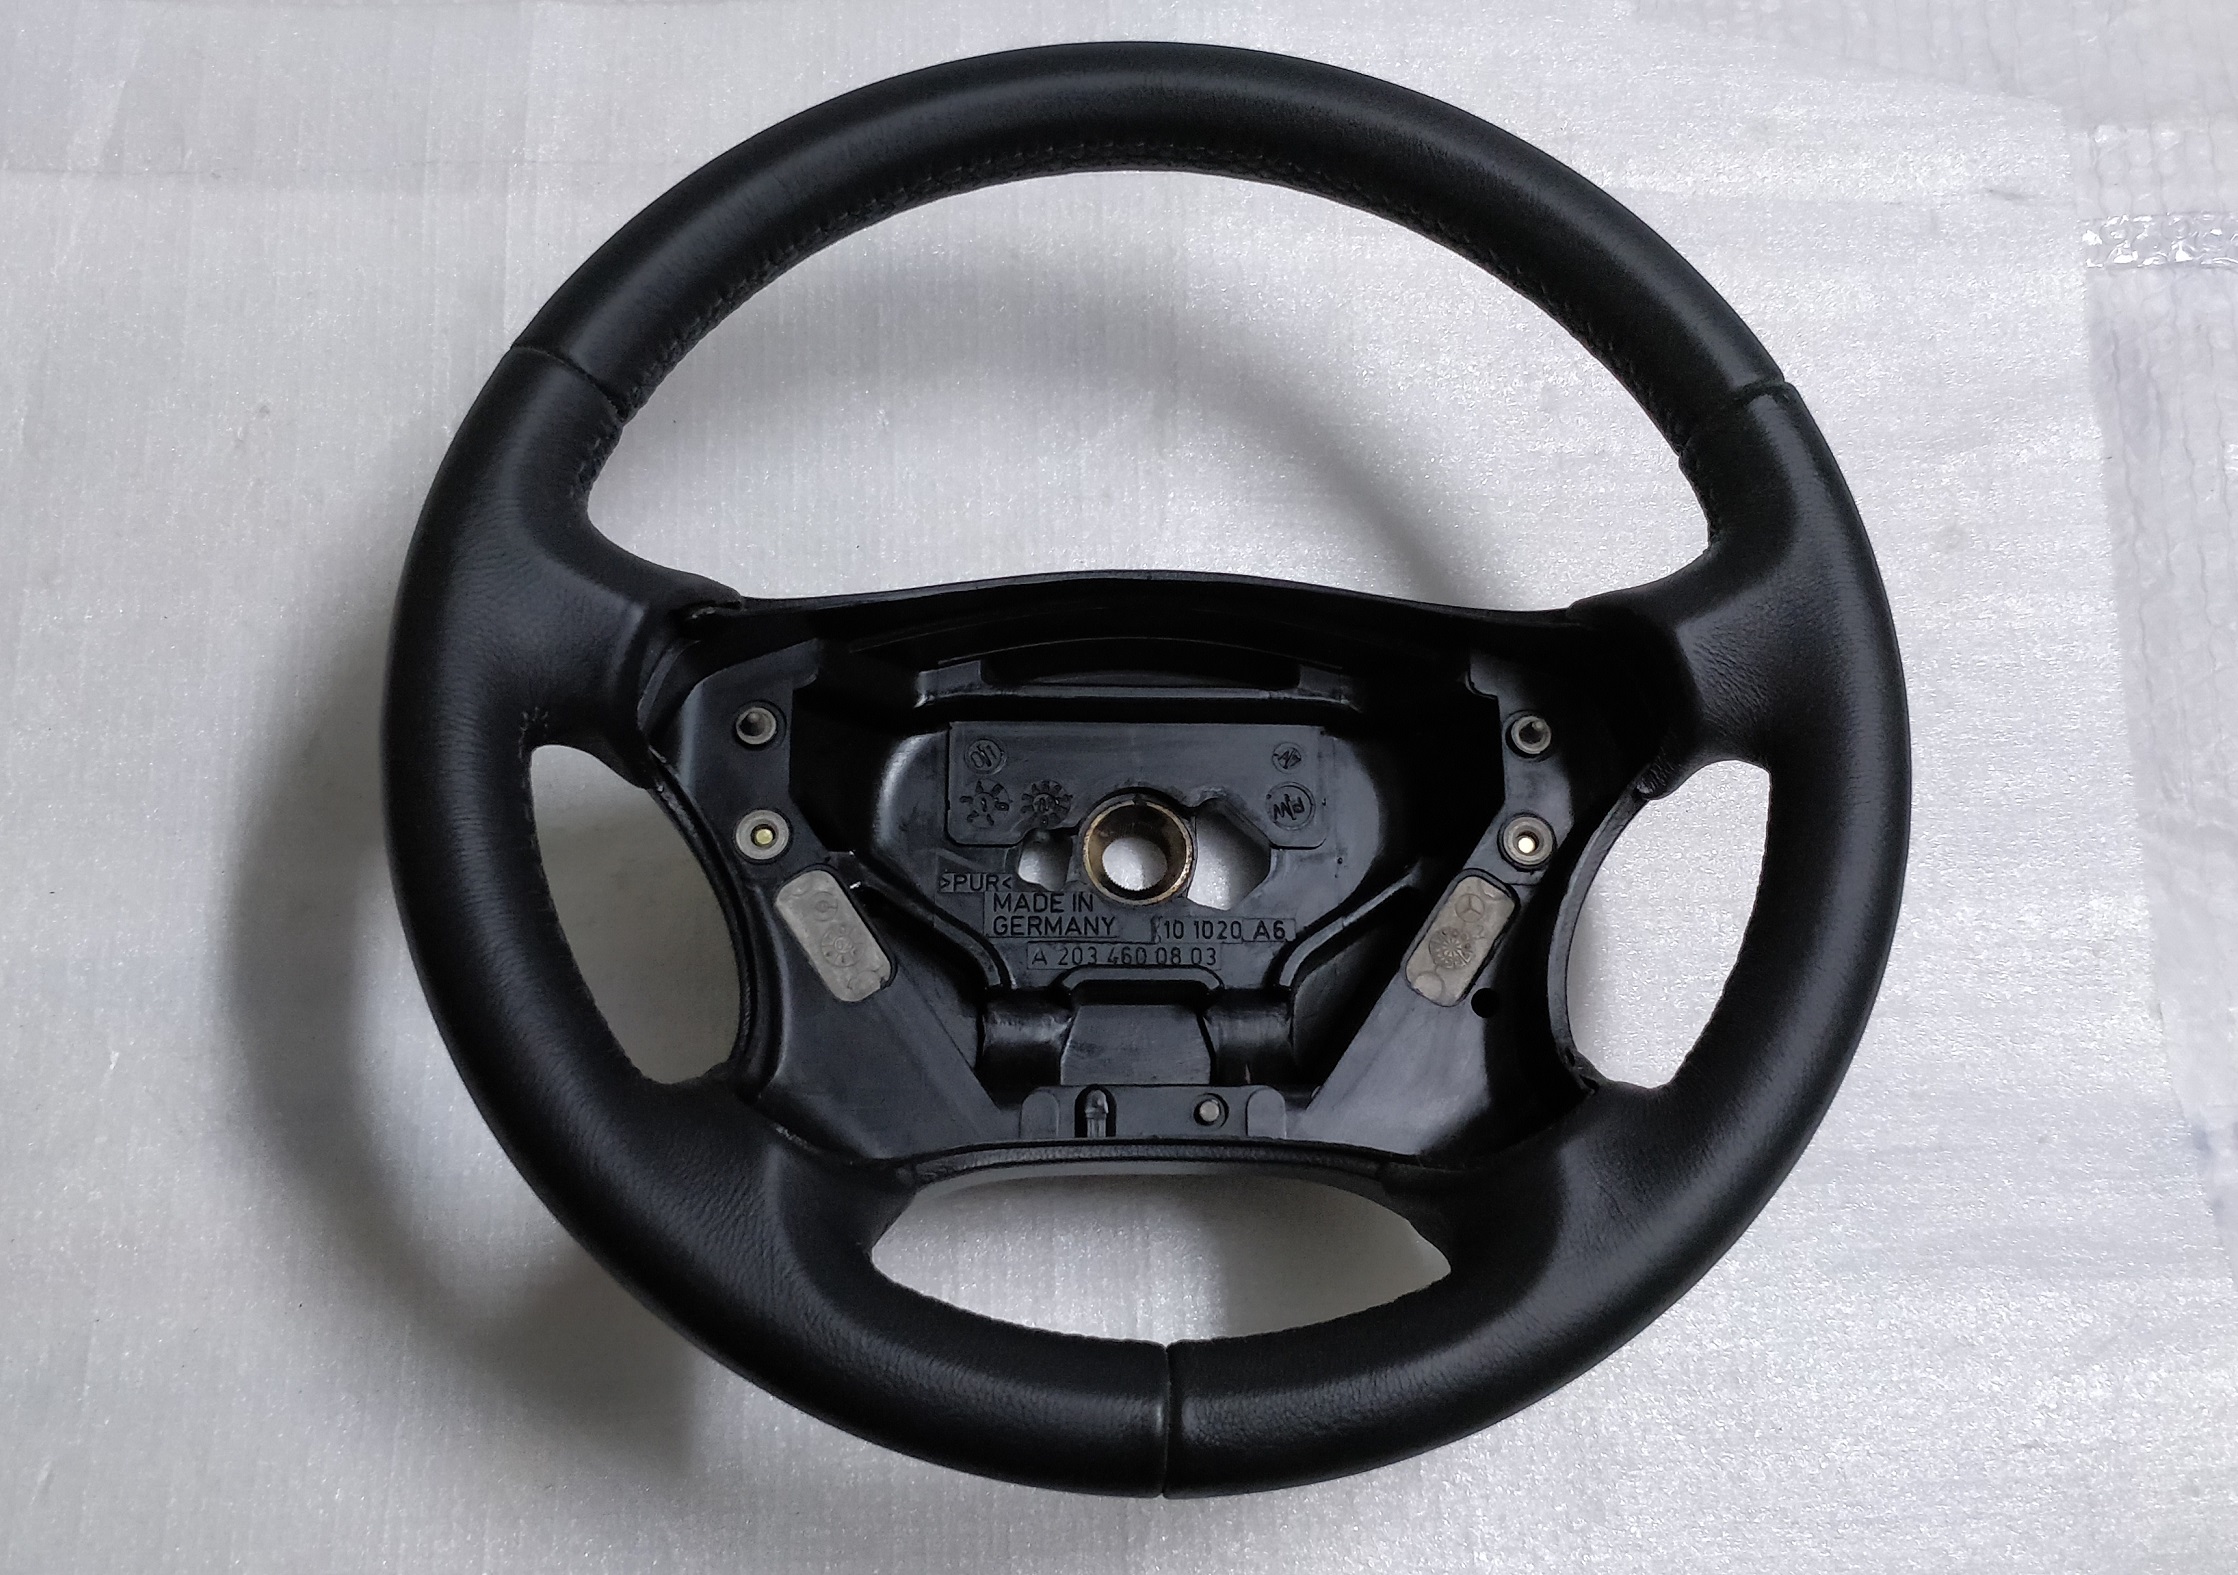 Mercedes W203 steering wheel S203 A2034600803 new leather C200 C320